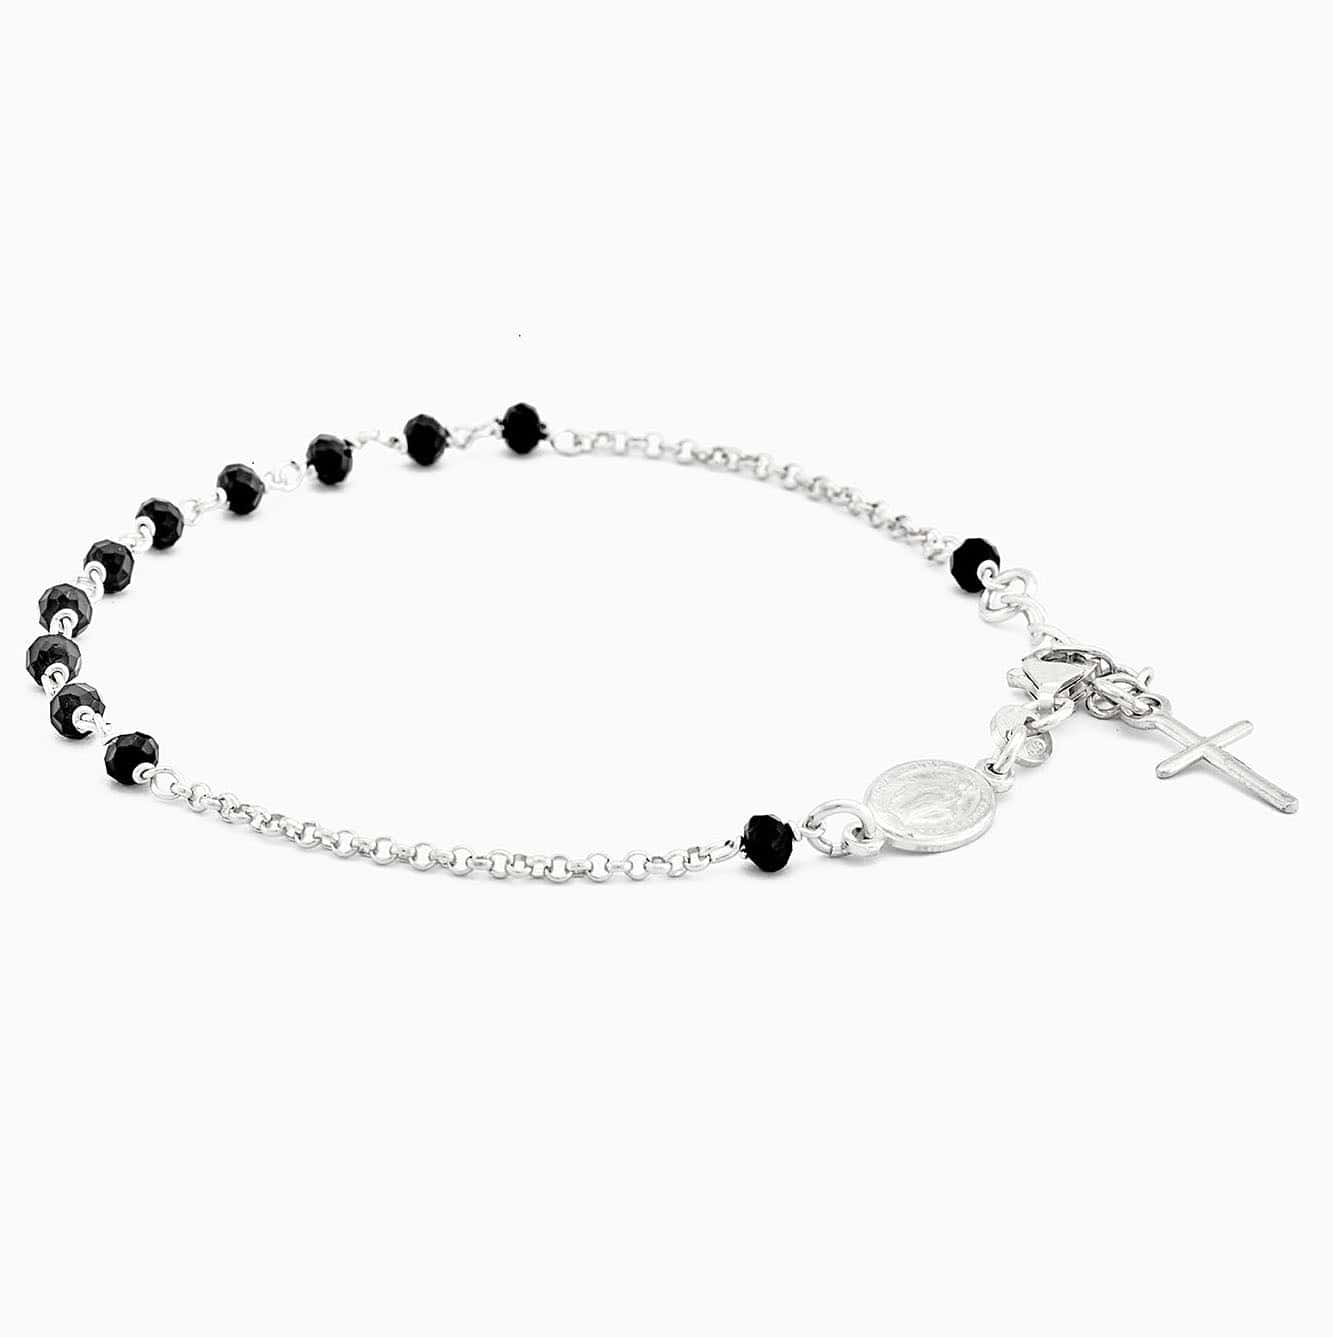 MONDO CATTOLICO Prayer Beads Rhodium e Black Beads / Cm 17.5 (6.9 in) STERLING SILVER ROSARY BRACELET WITH MIRACULOUS MEDAL AND CROSS FACETED BEADS